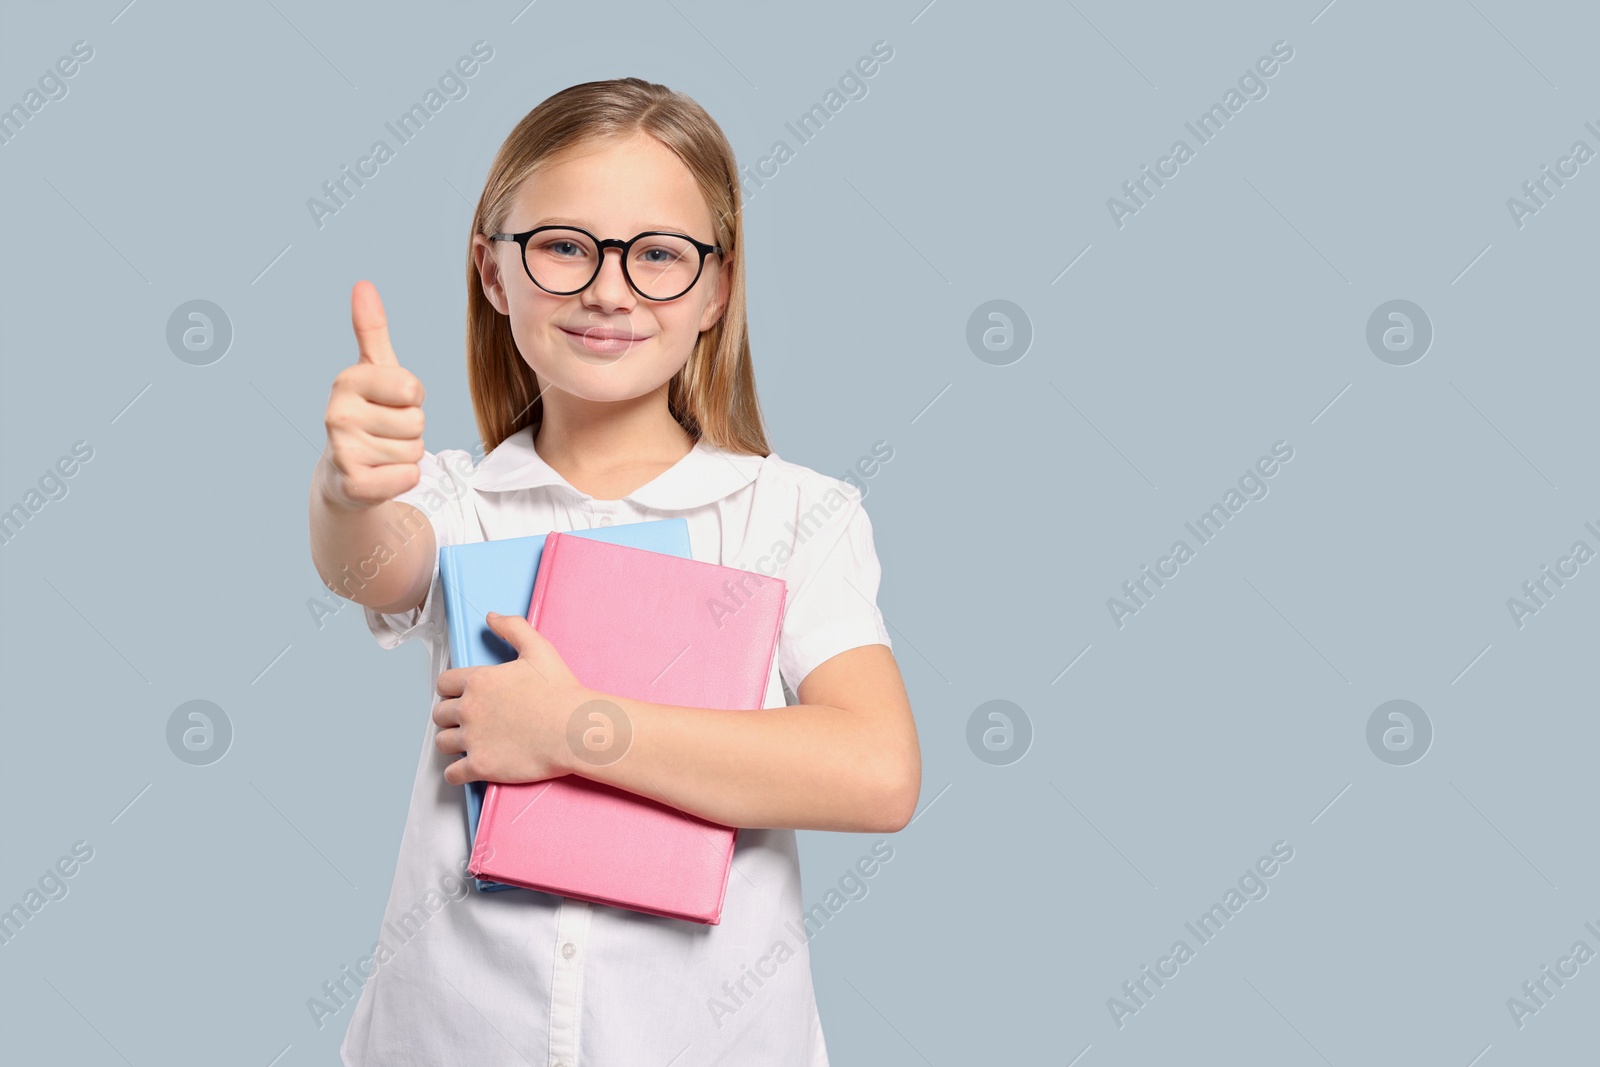 Photo of Cute girl in glasses with books showing thumb up on light grey background. Space for text